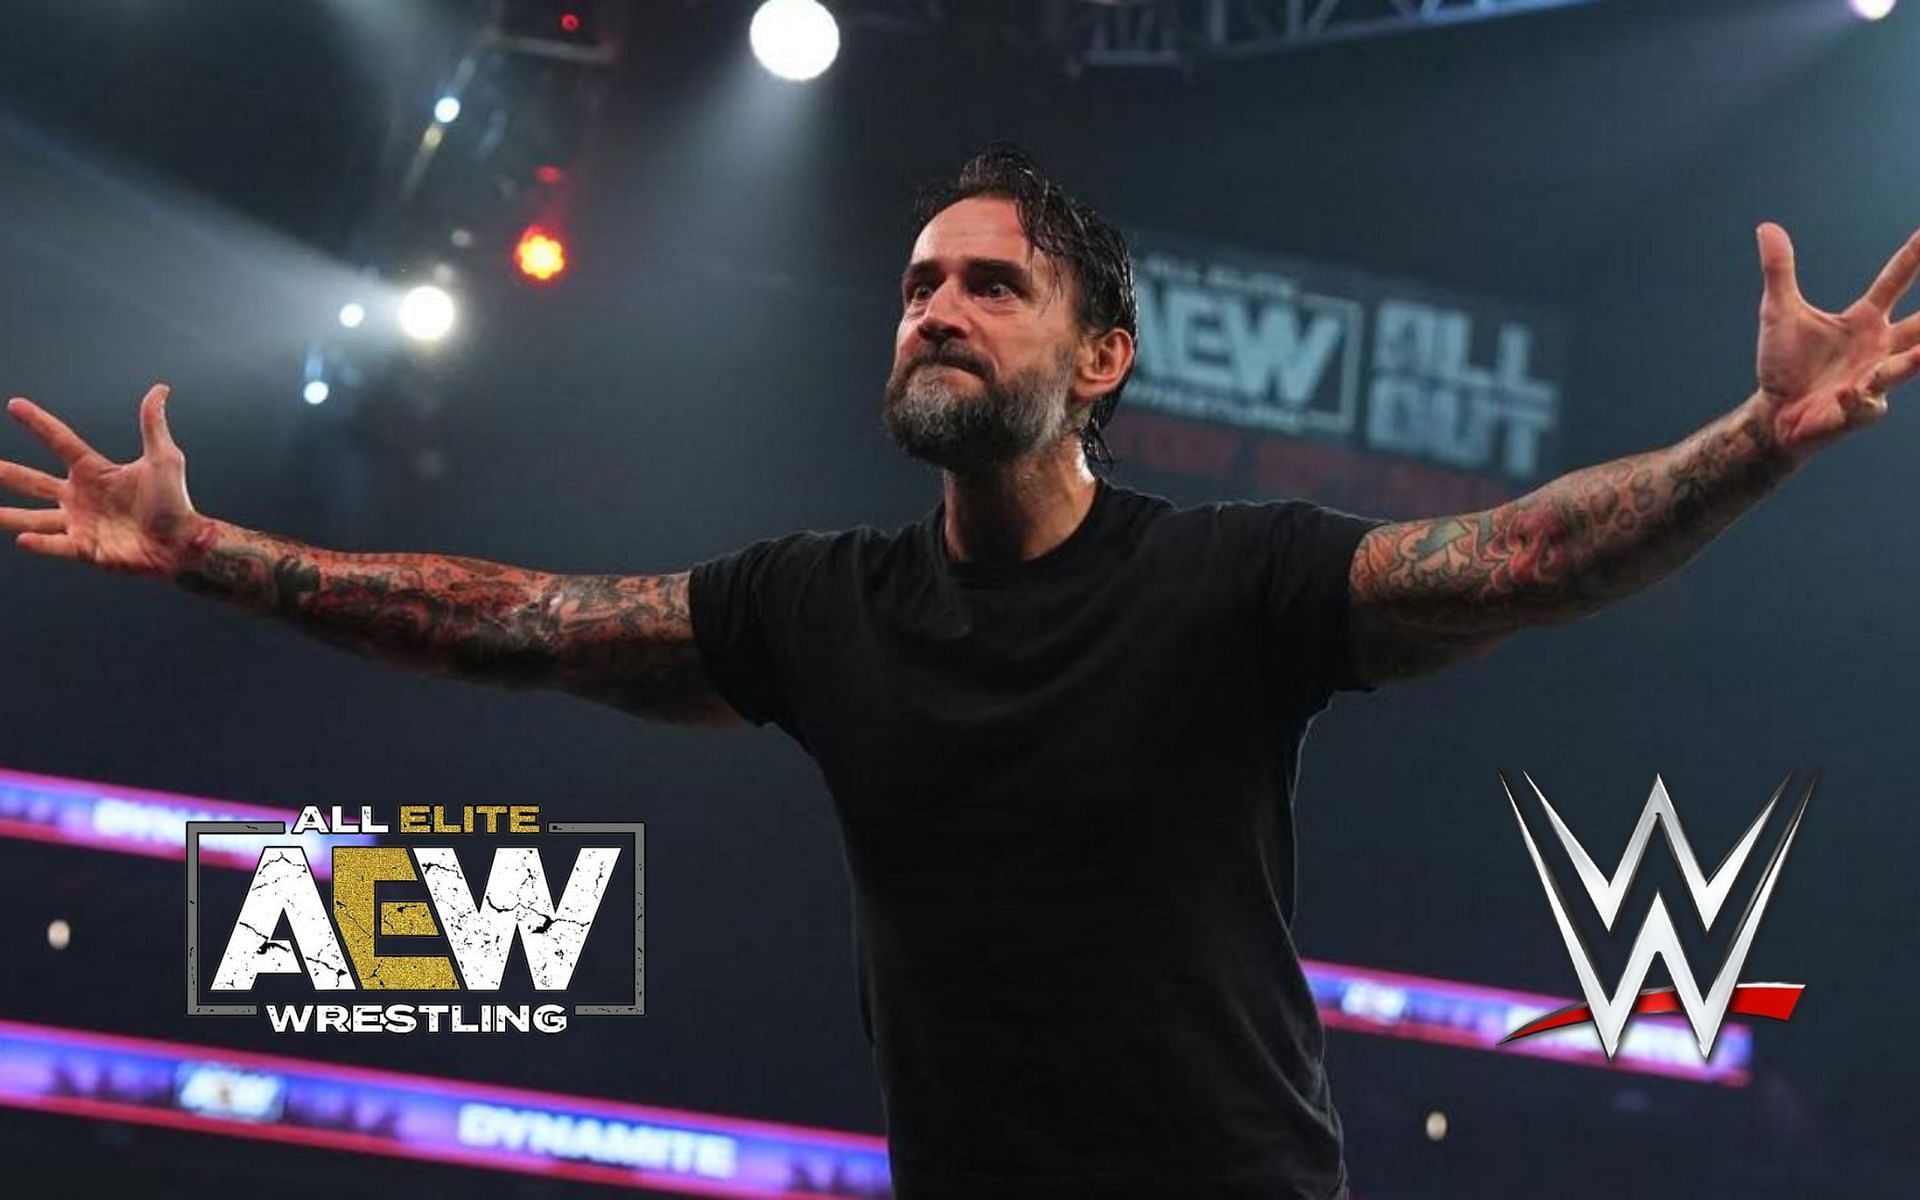 Former AEW World Champion CM Punk has been the talk of the wrestling world recently.